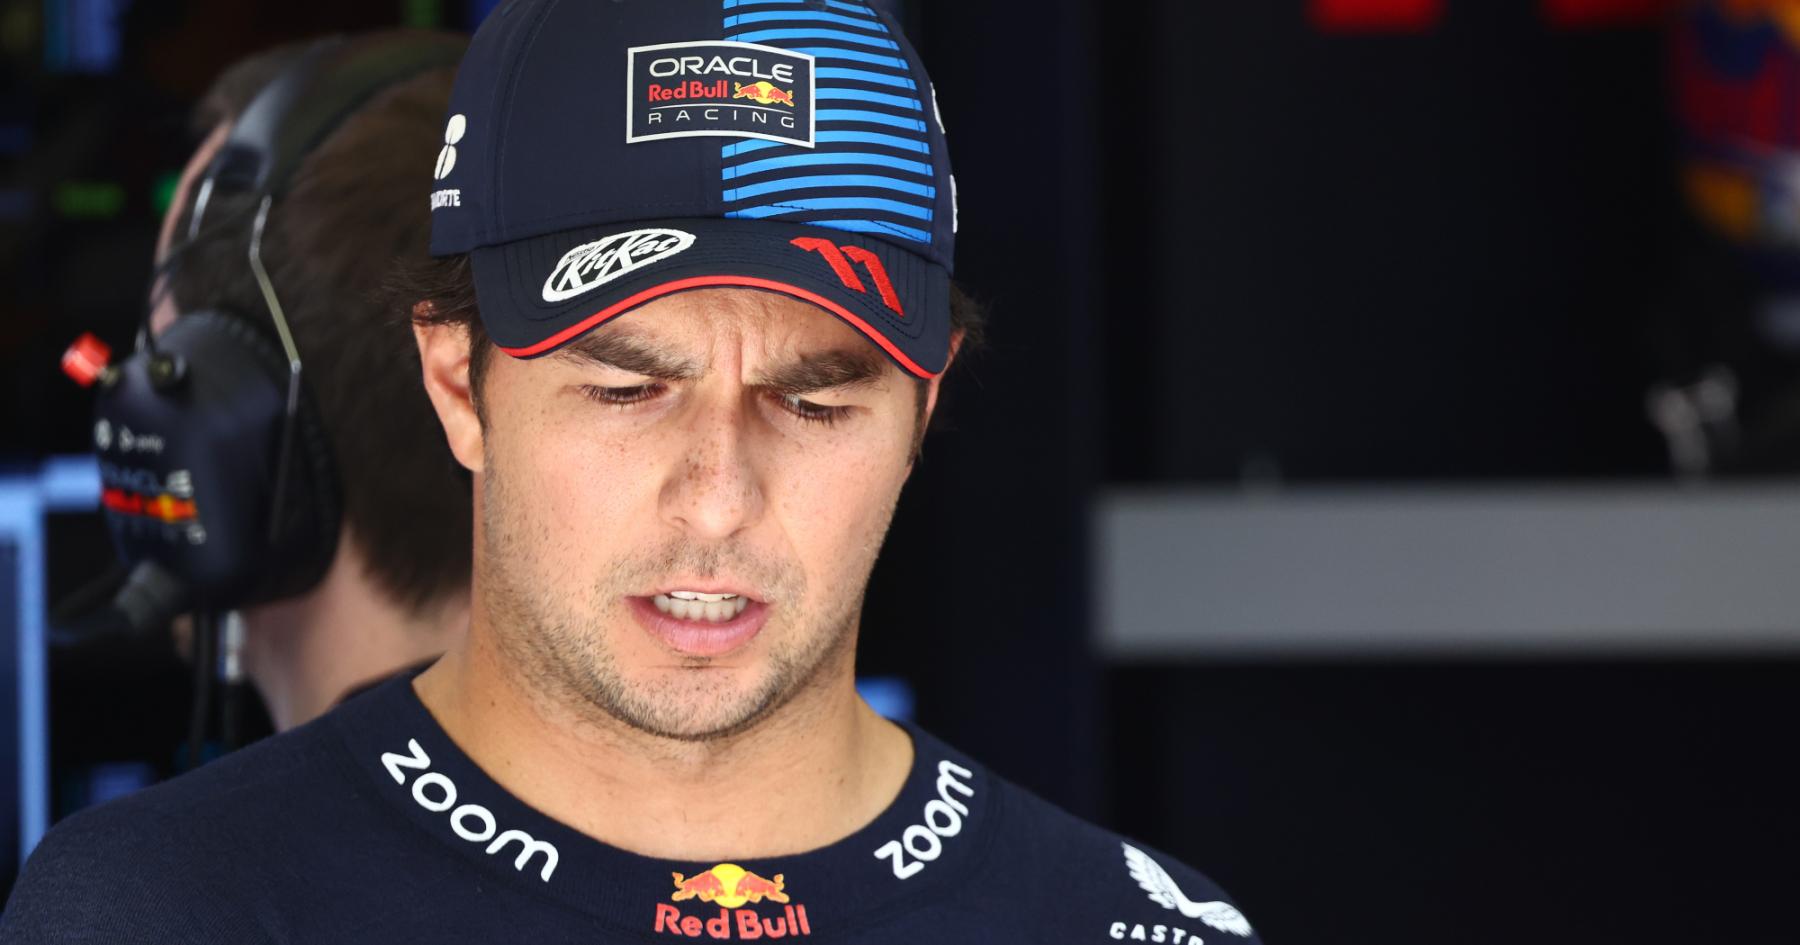 Turning the Page: Perez and Red Bull Move On from Horner Fiasco